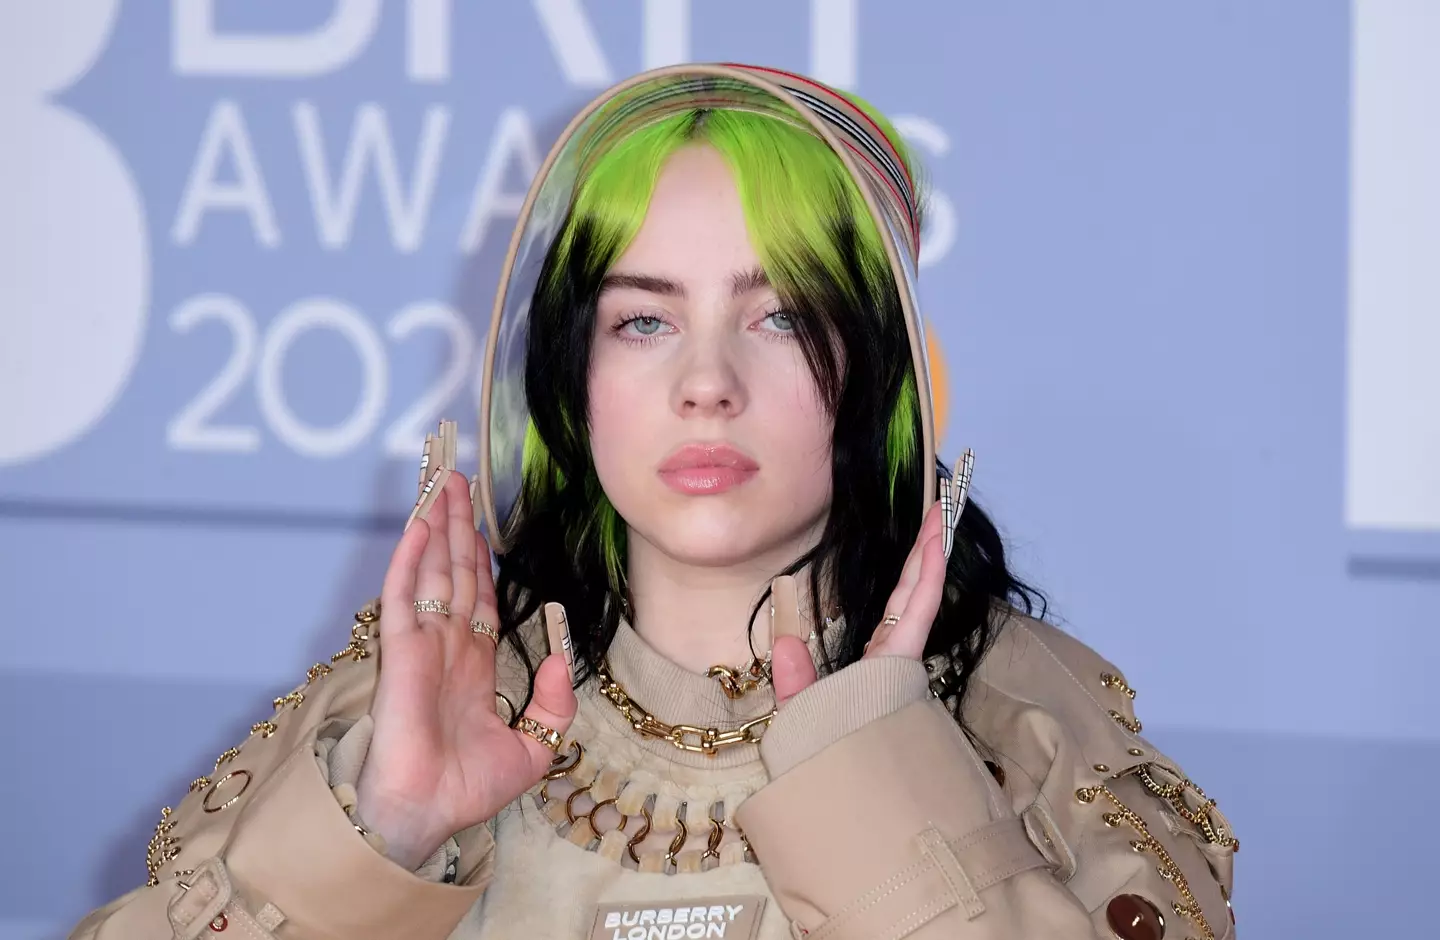 Billie Eilish and her boyfriend Jesse Rutherford hit up a Halloween bash together over the weekend.